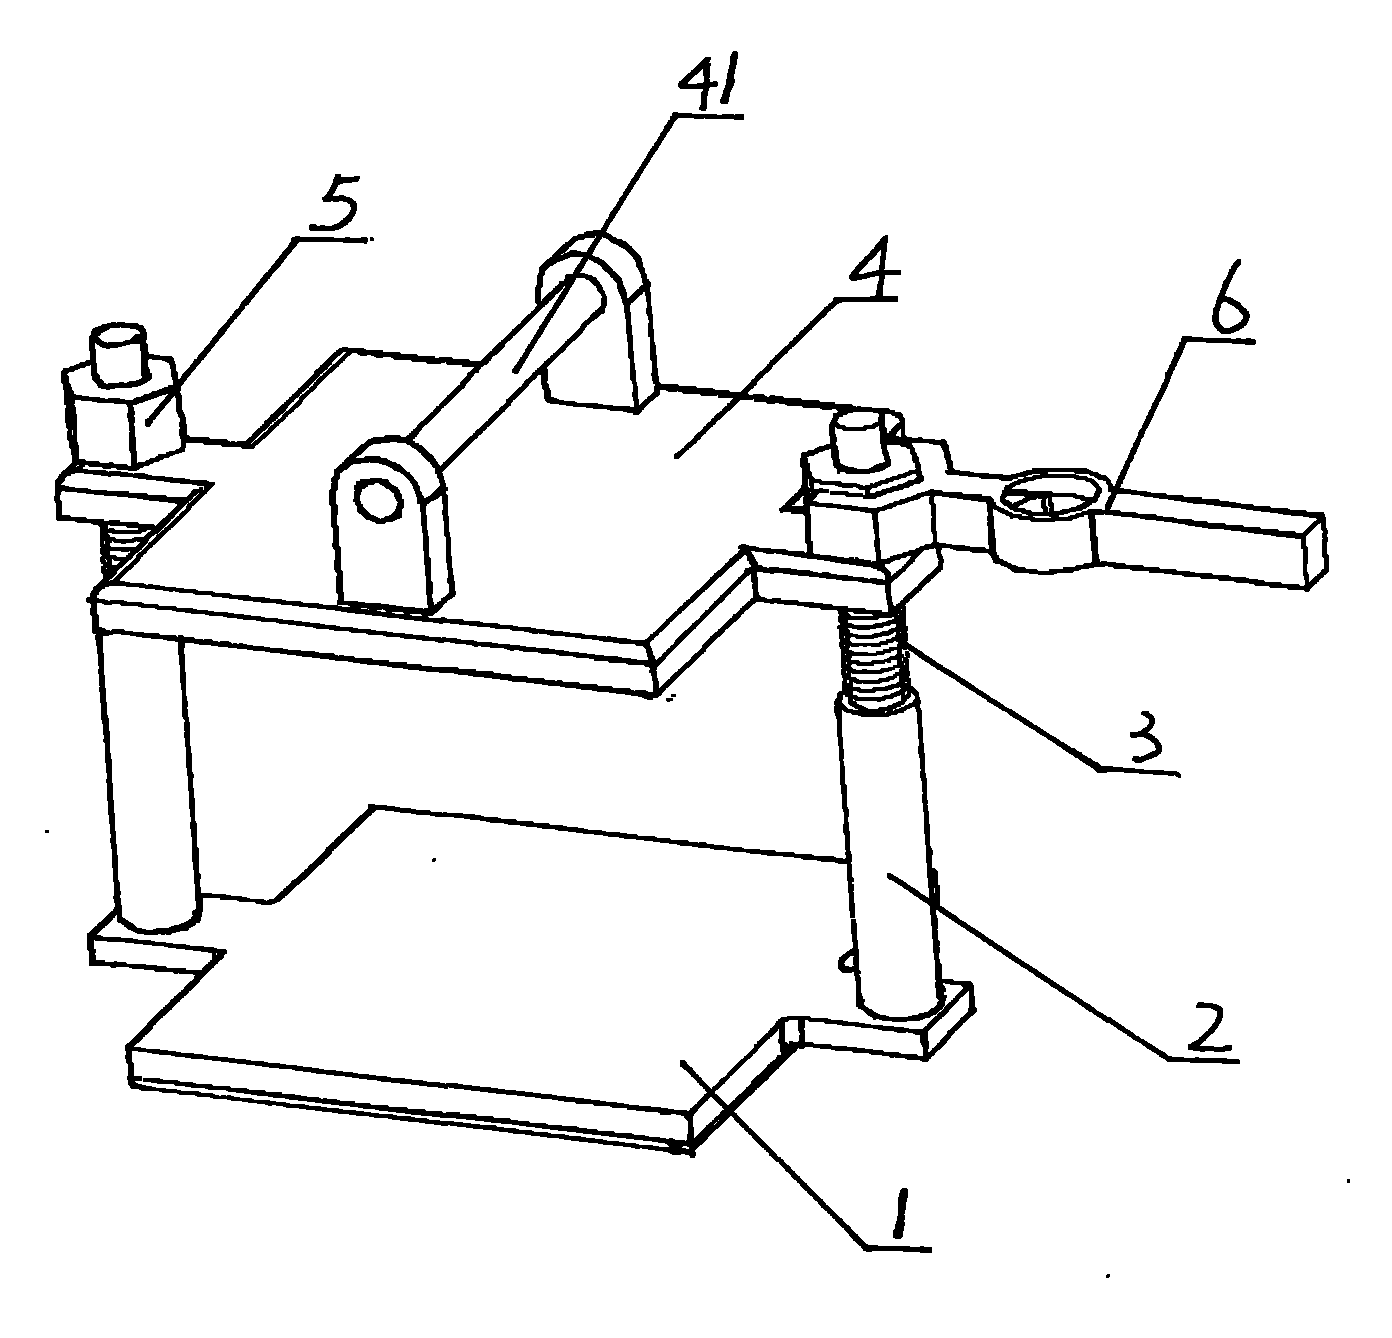 Silicon wafer pressure setting and applying clamp for plasma etcher